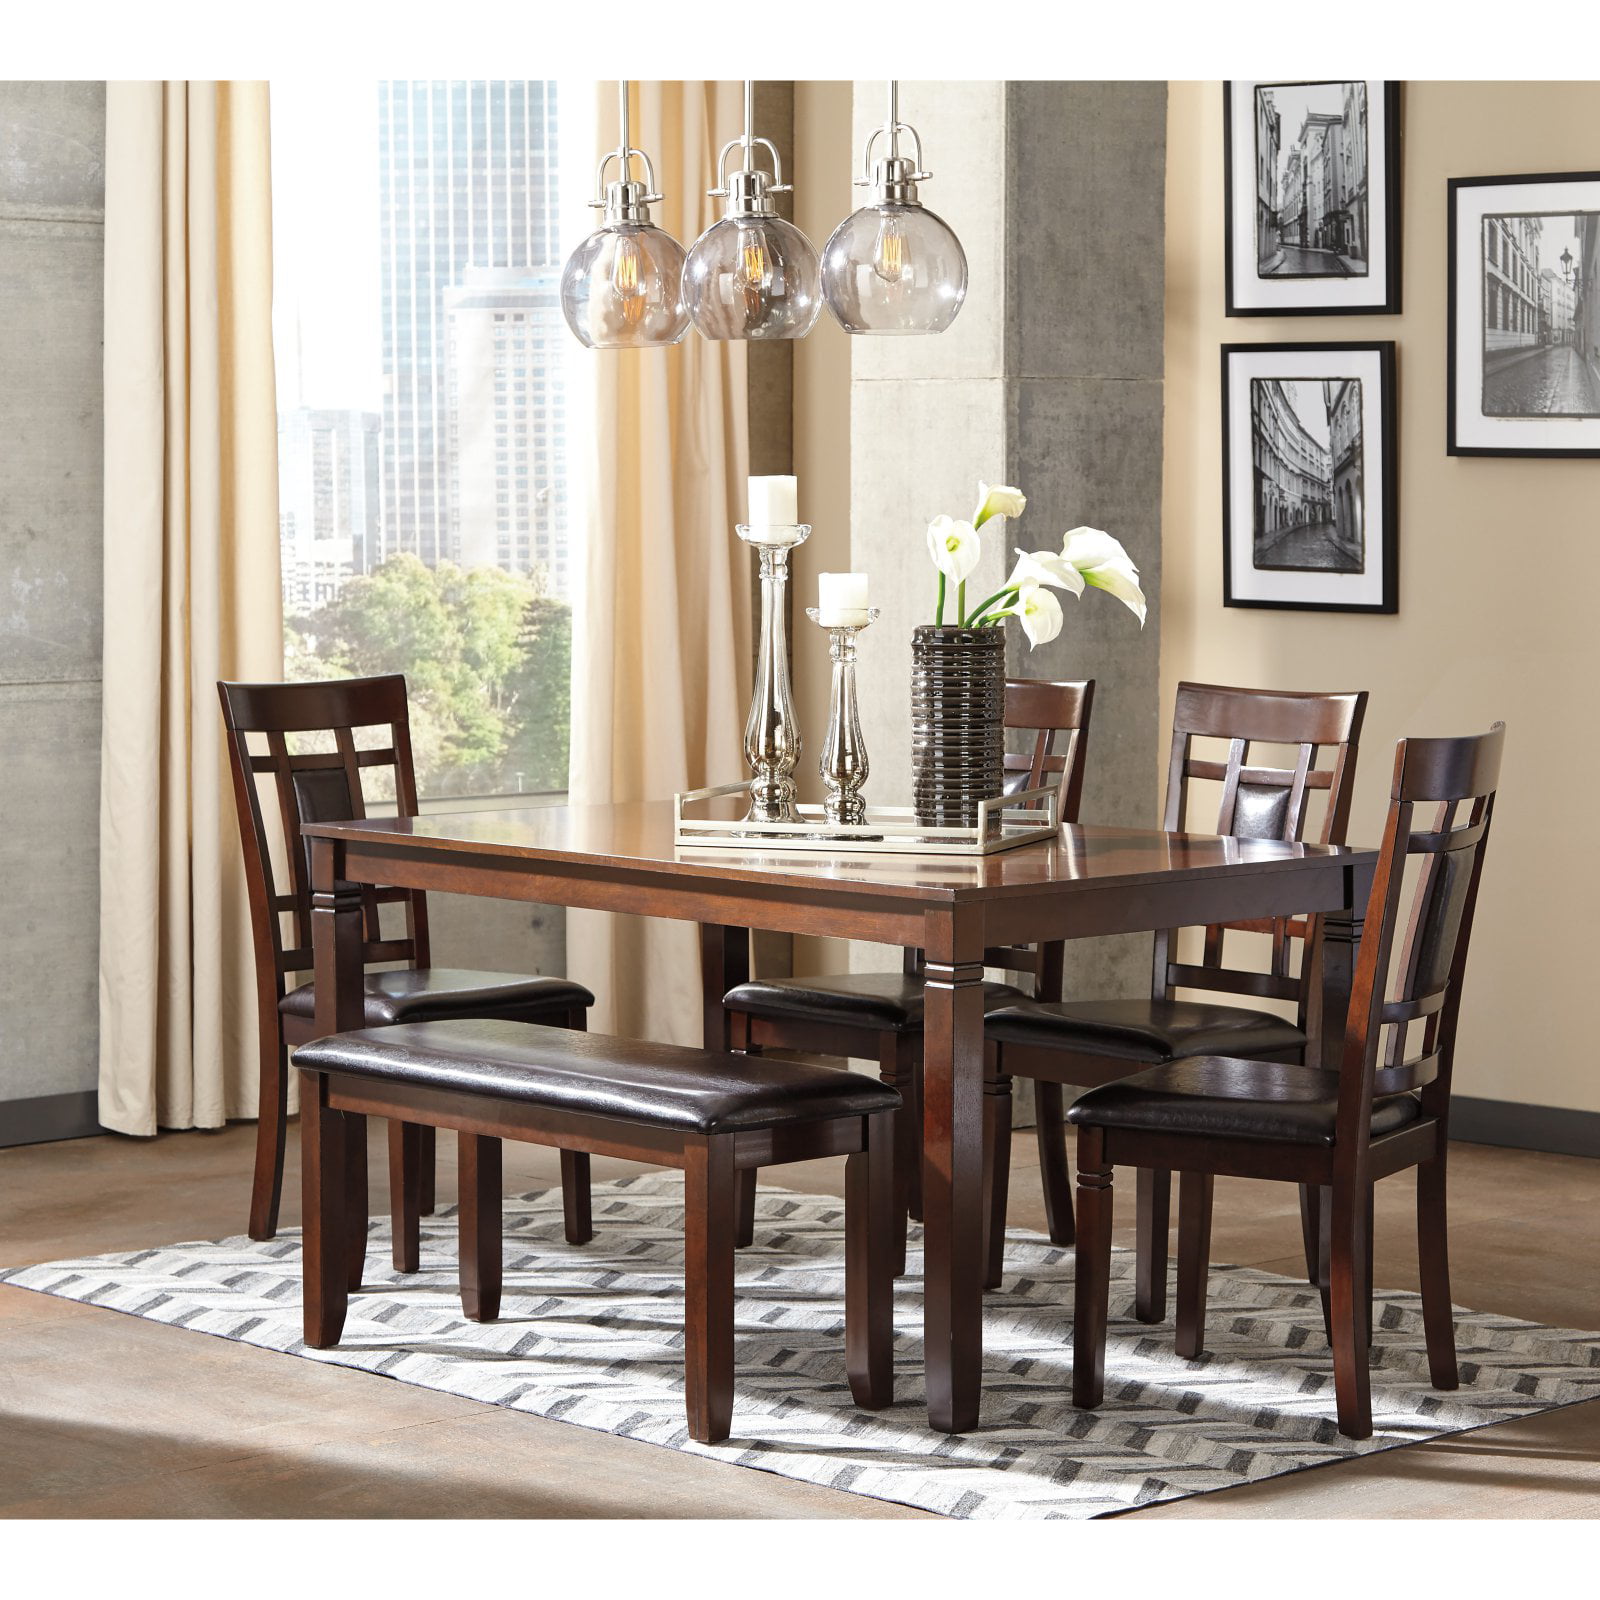 Ashley Bennox 6 Piece Dining Table Set, Bennox Dining Room Table And Chairs With Bench Set Of 6